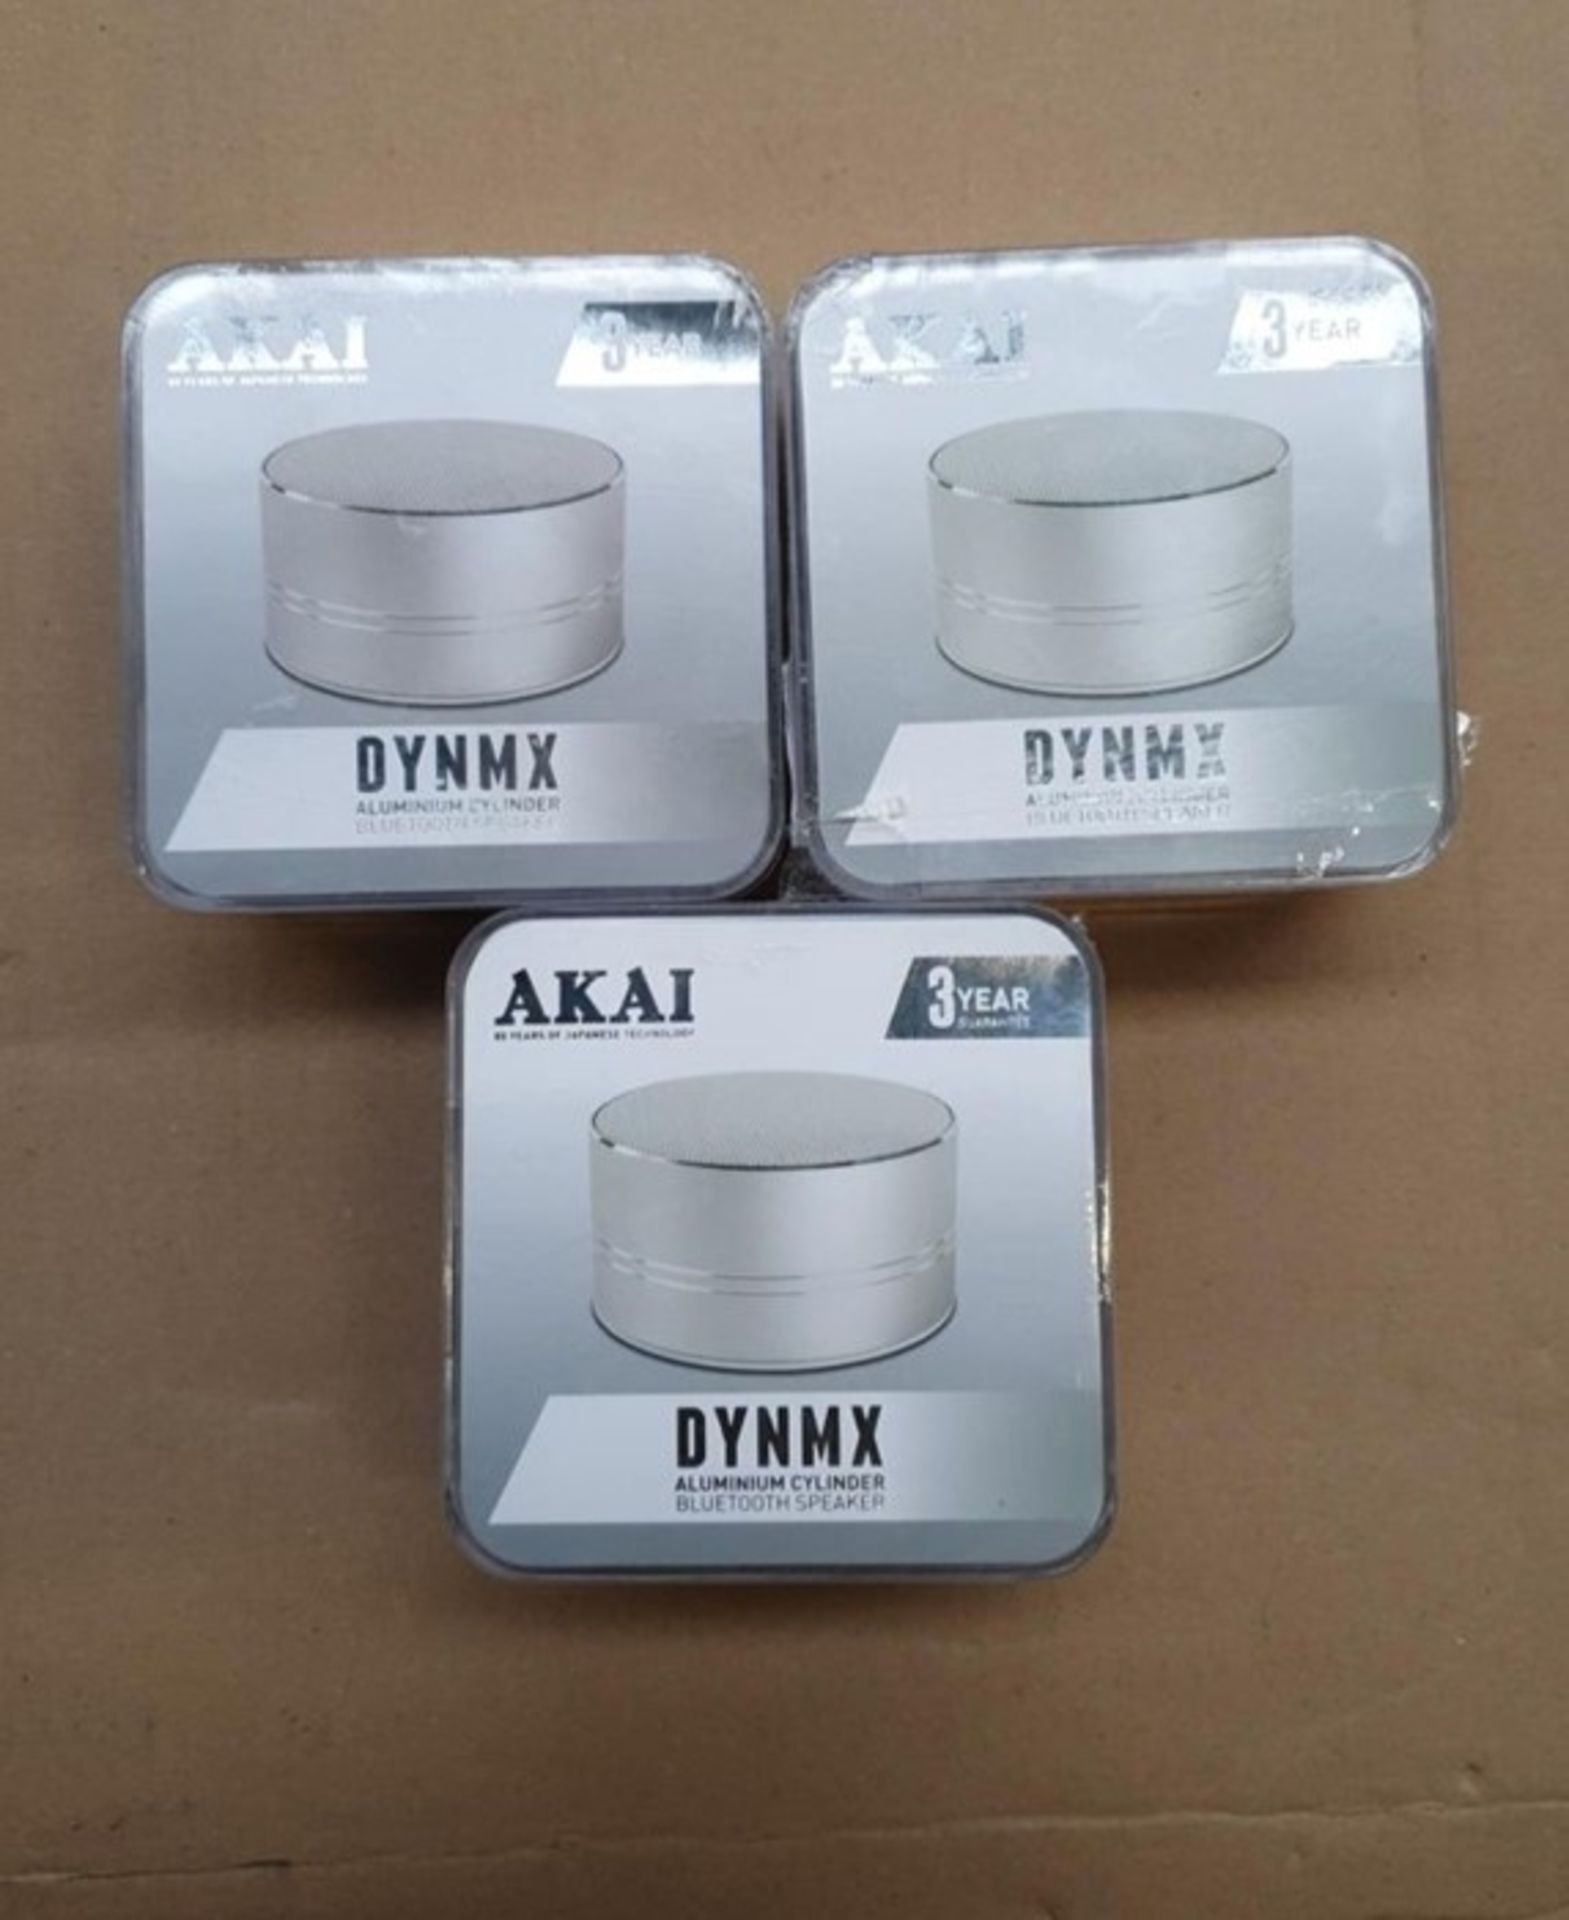 1 LOT TO CONTAIN 3 AKAI DYNMX ALUMINIUM CYLINDER BLUETOOTH SPEAKERS SILVER / BL -5615 / RRP £45.